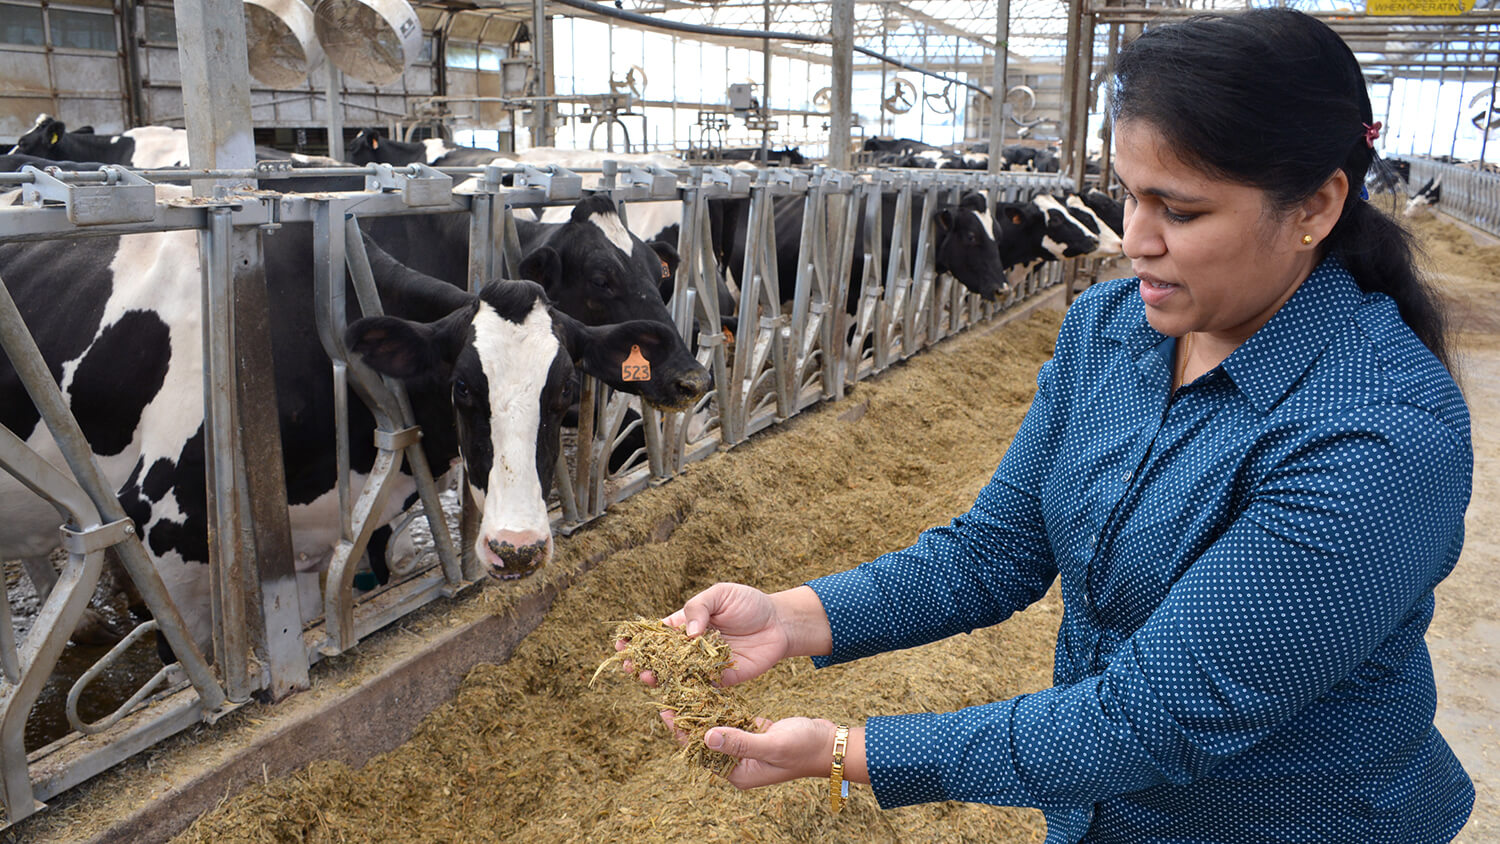 Dr. Pitta’s team adds an enzyme powder to cow feed, which cuts methane emissions by 30 percent.